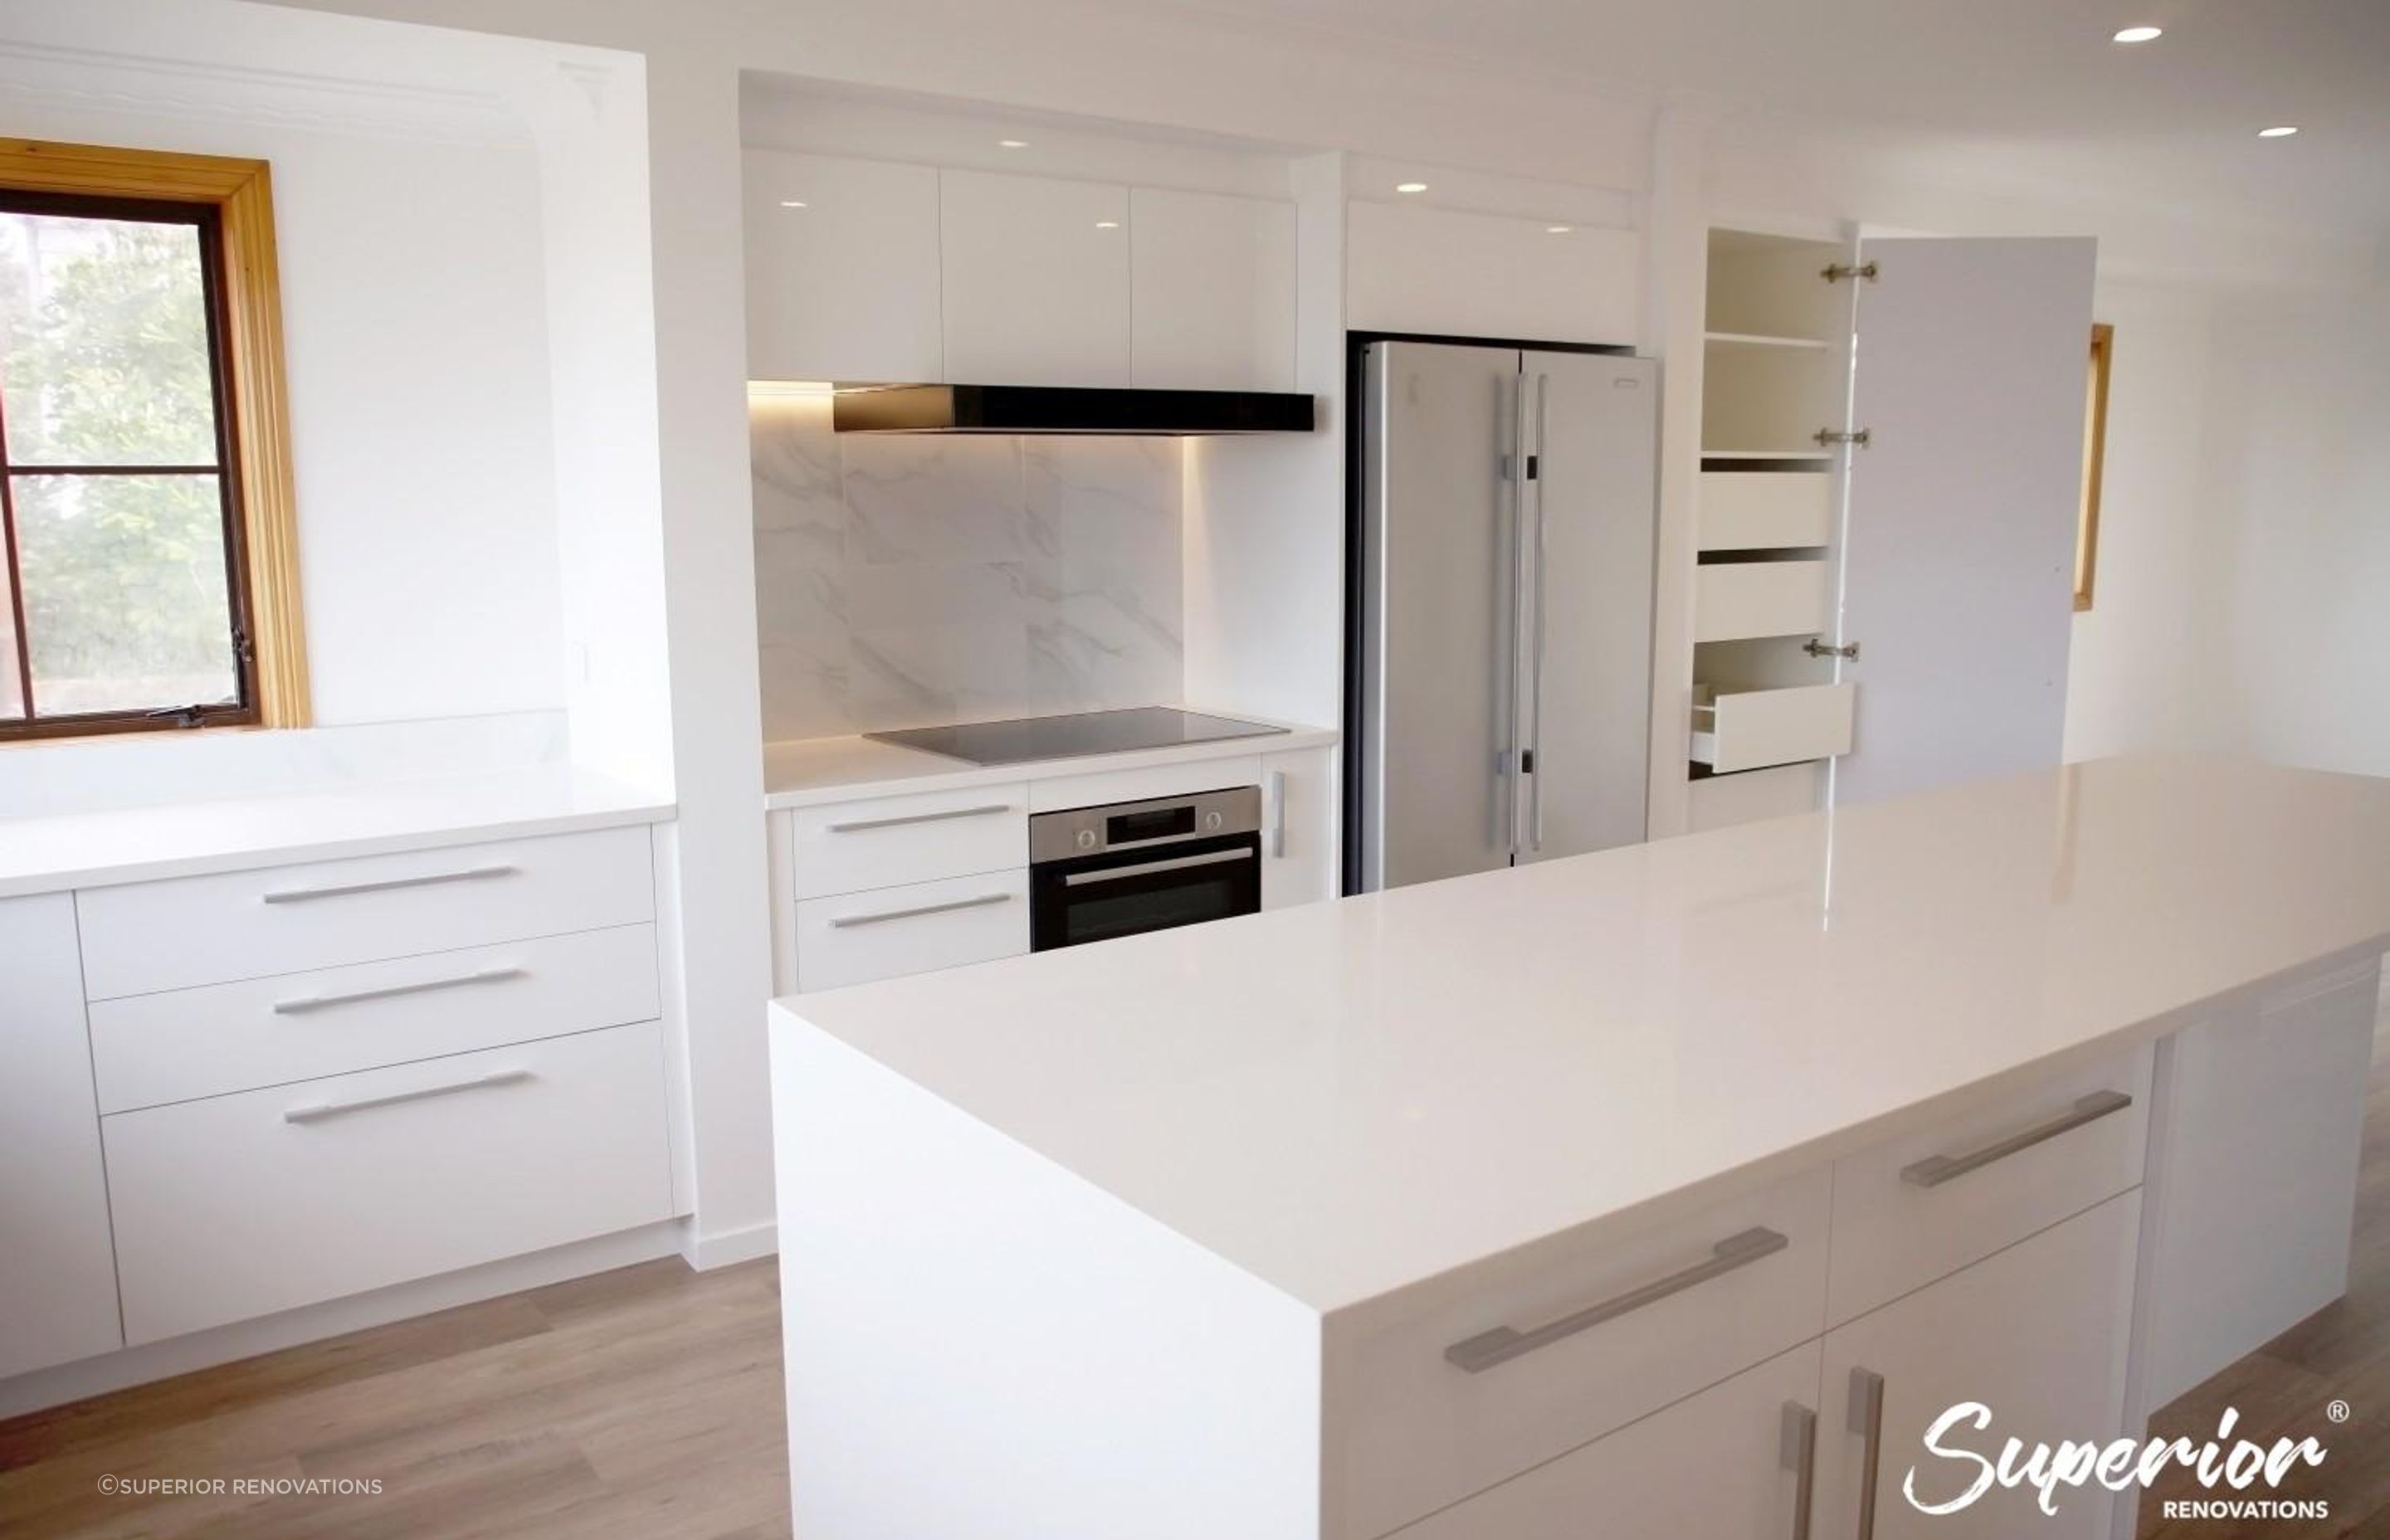 Kitchen renovation in Blockhouse Bay – This island provides plenty of storage cabinets as well as counter space